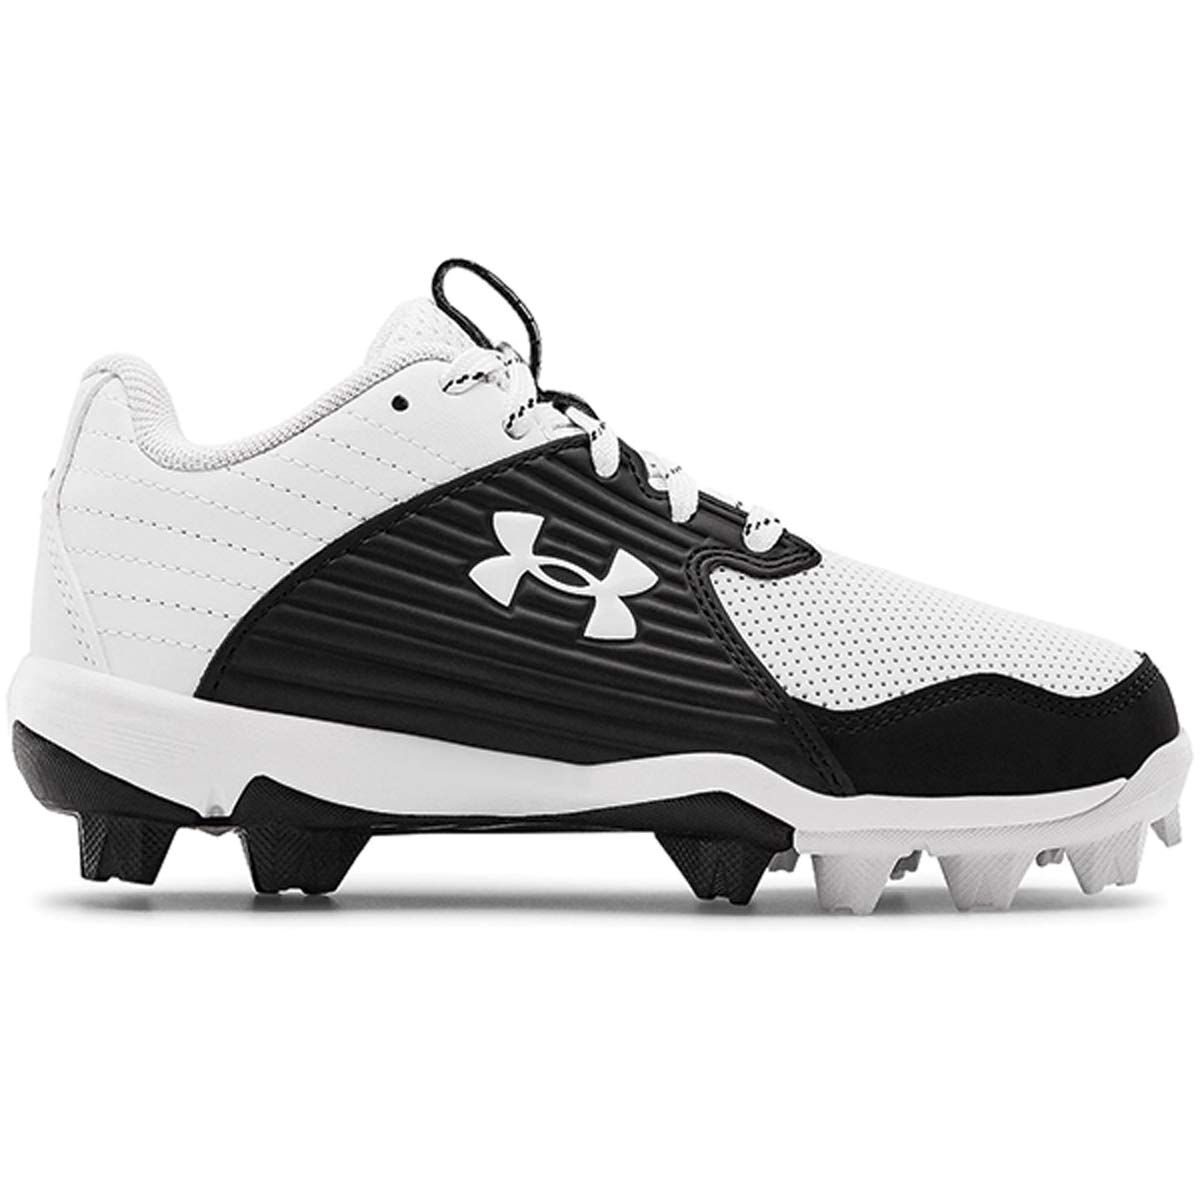 Under Armour Leadoff Low RM JR White-Black Size 10K Baseball Cleats NEW 